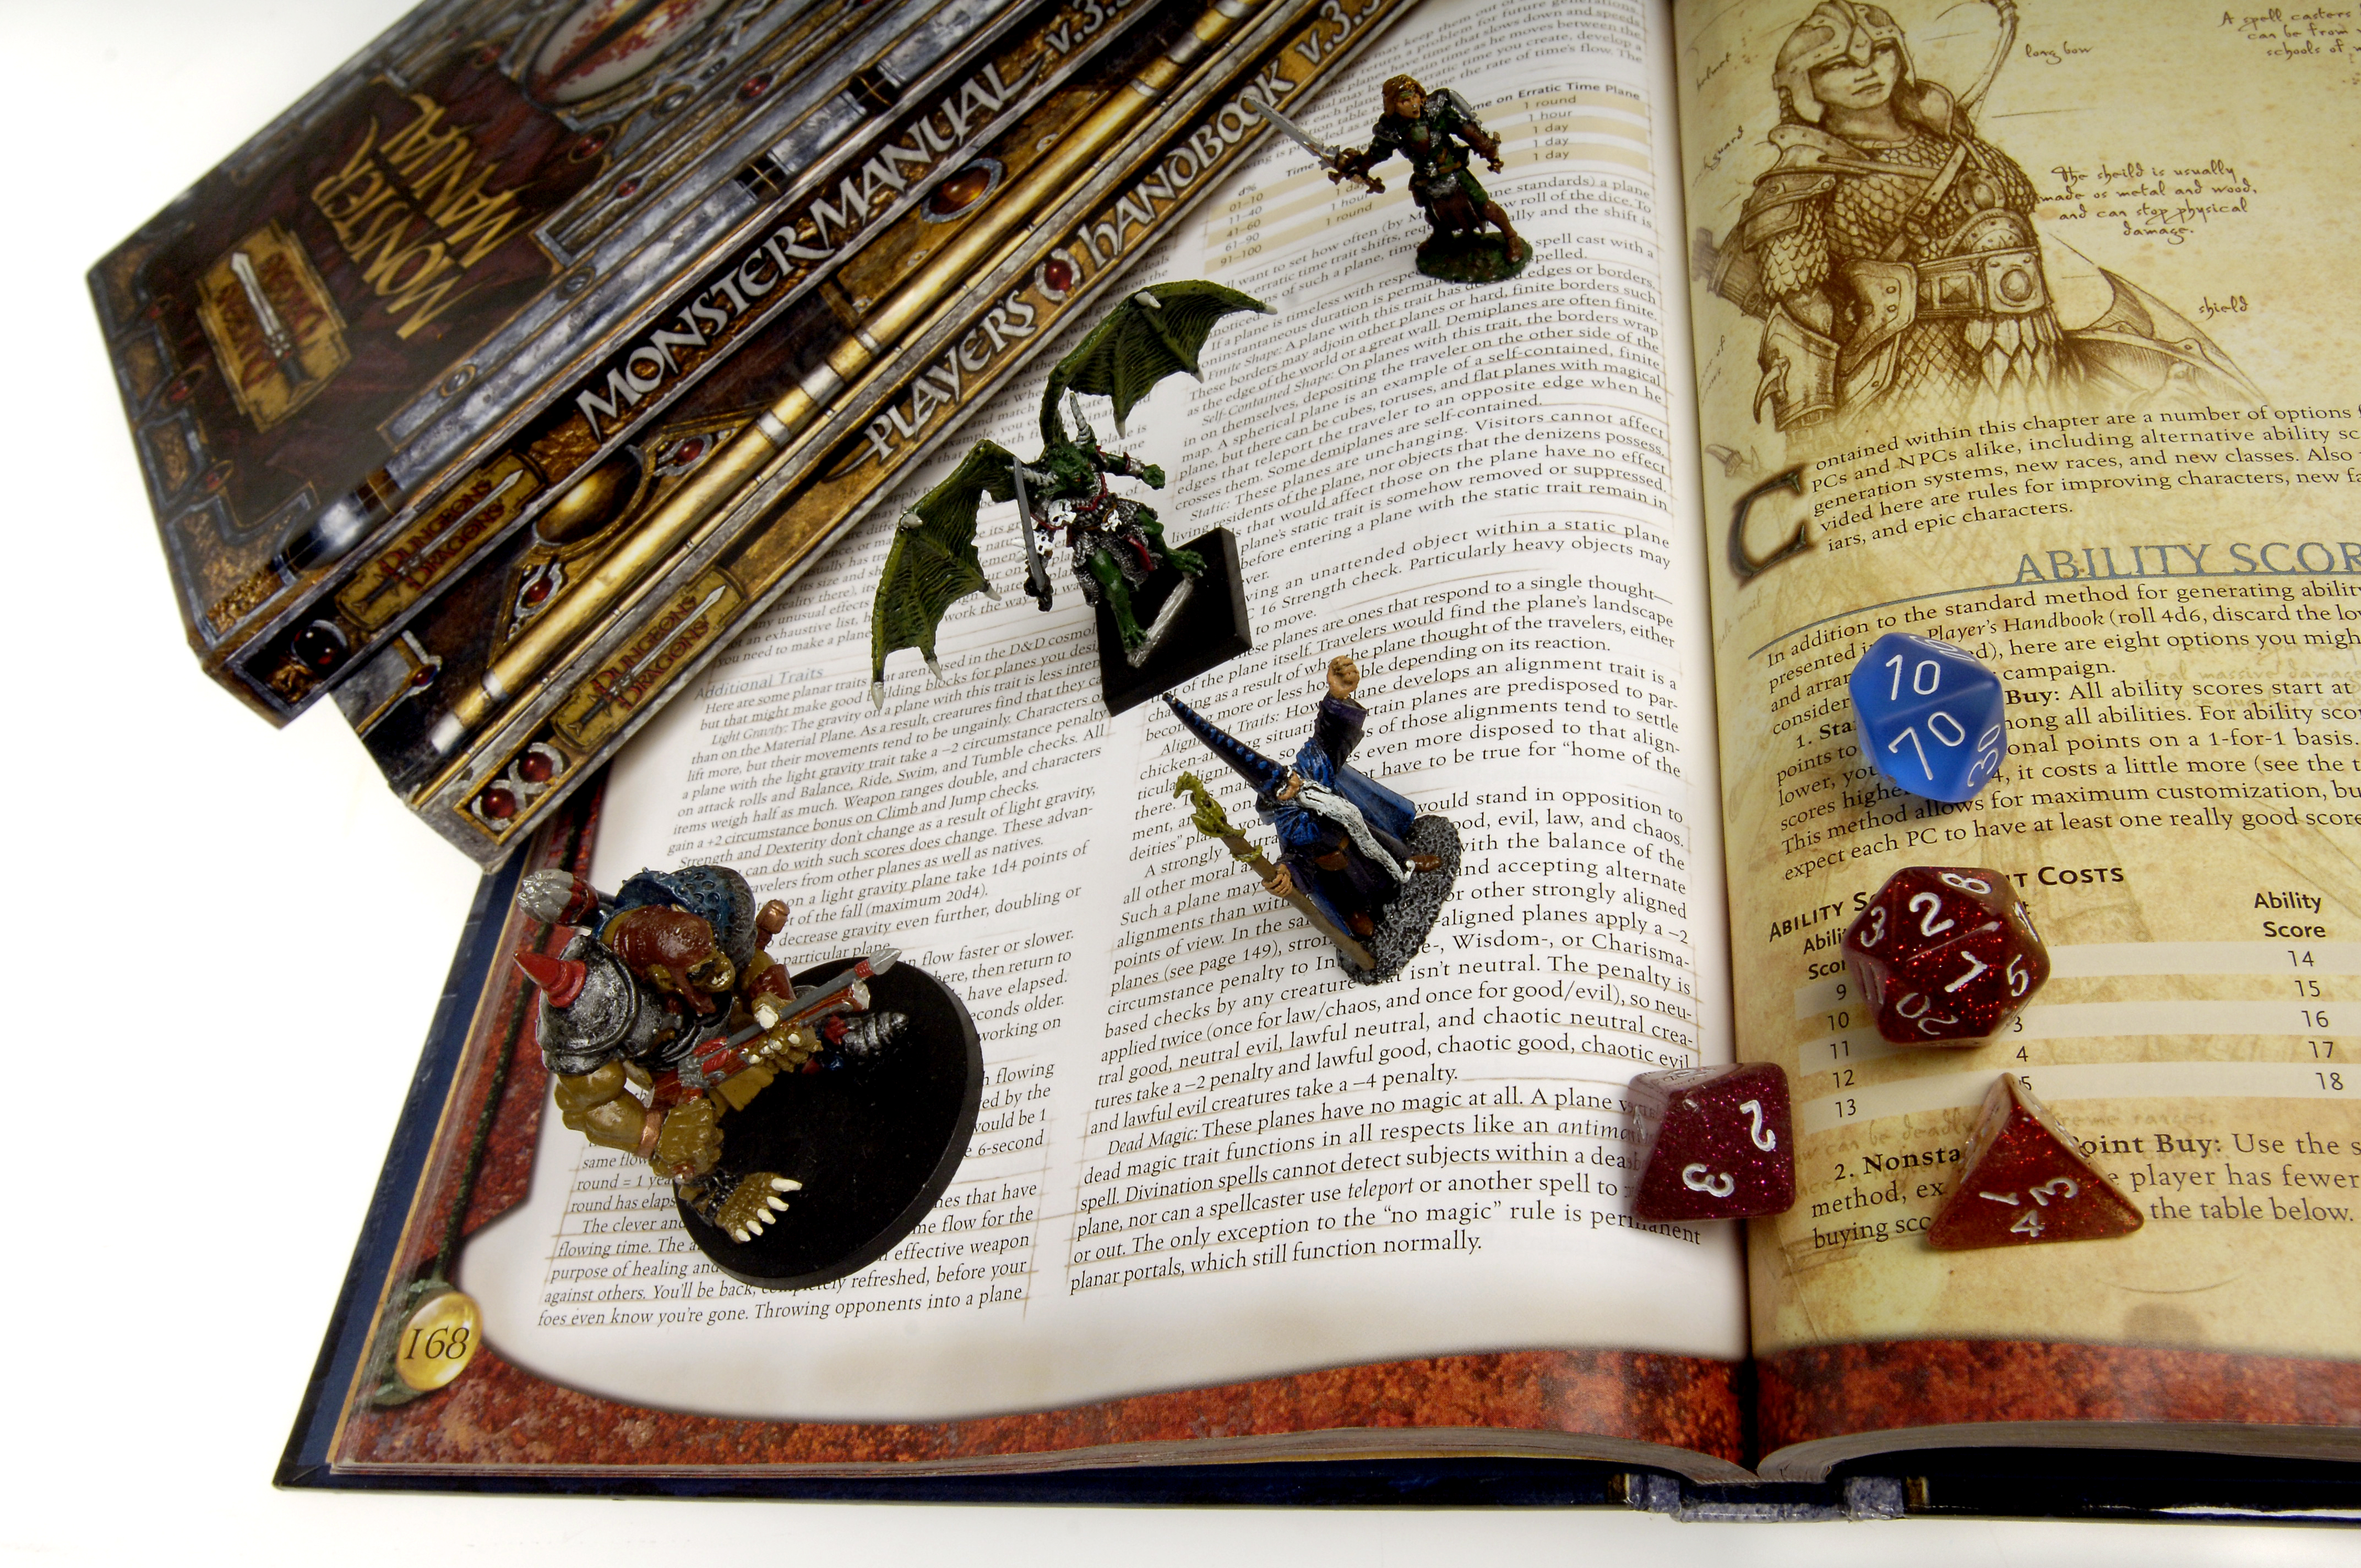 Books, die, figurines from Dungeons and Dragons